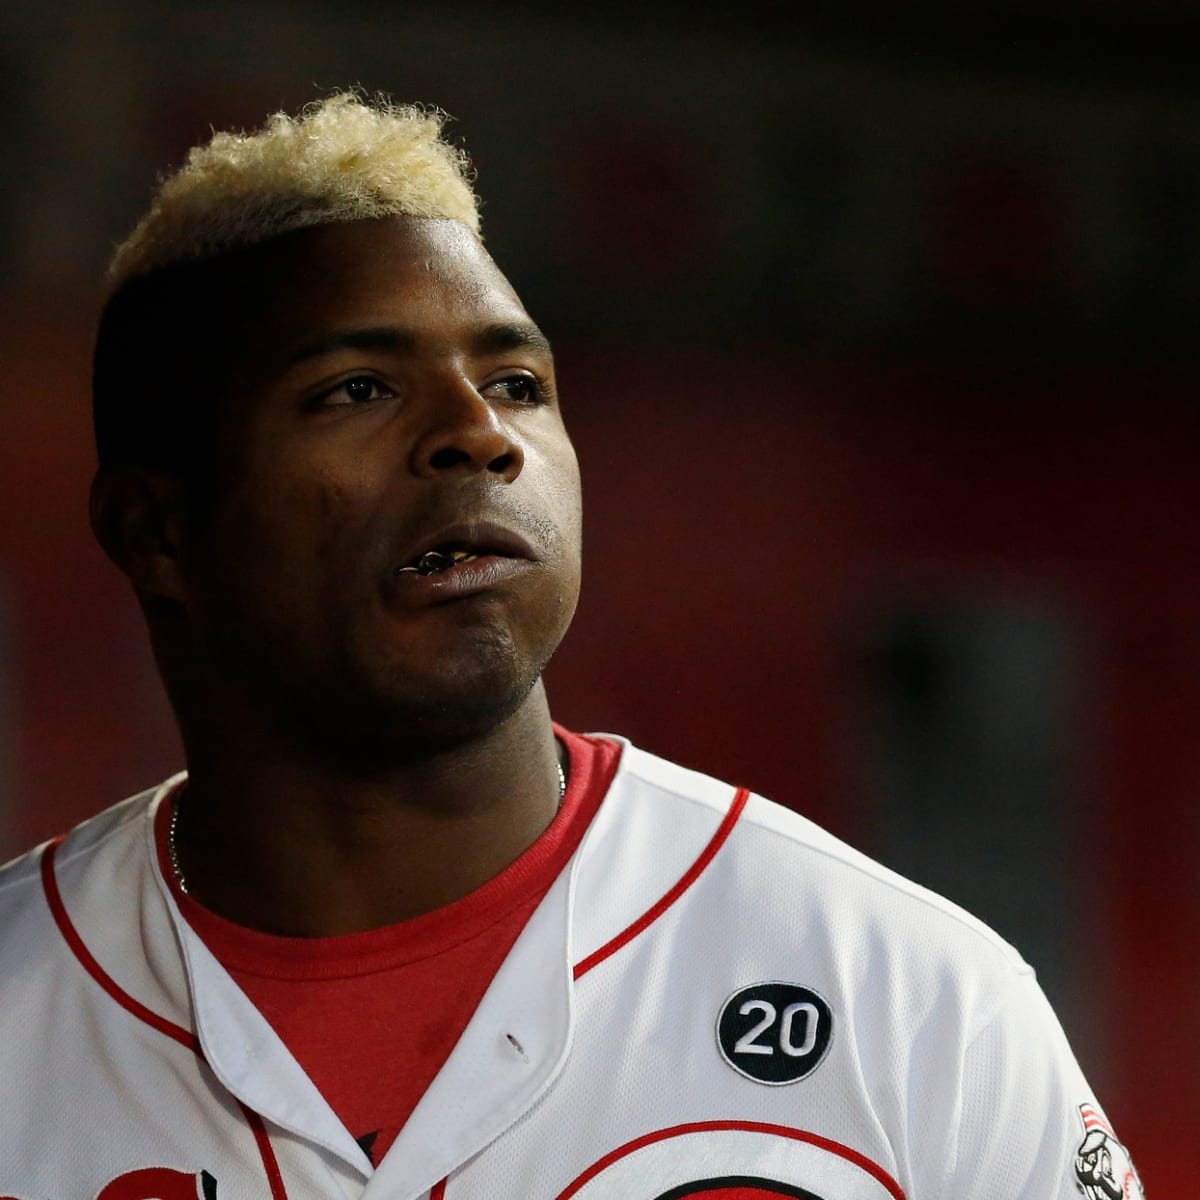 Watch: Yasiel Puig among five players ejected after Reds and Pirates  bench-clearing scuffle – Daily News